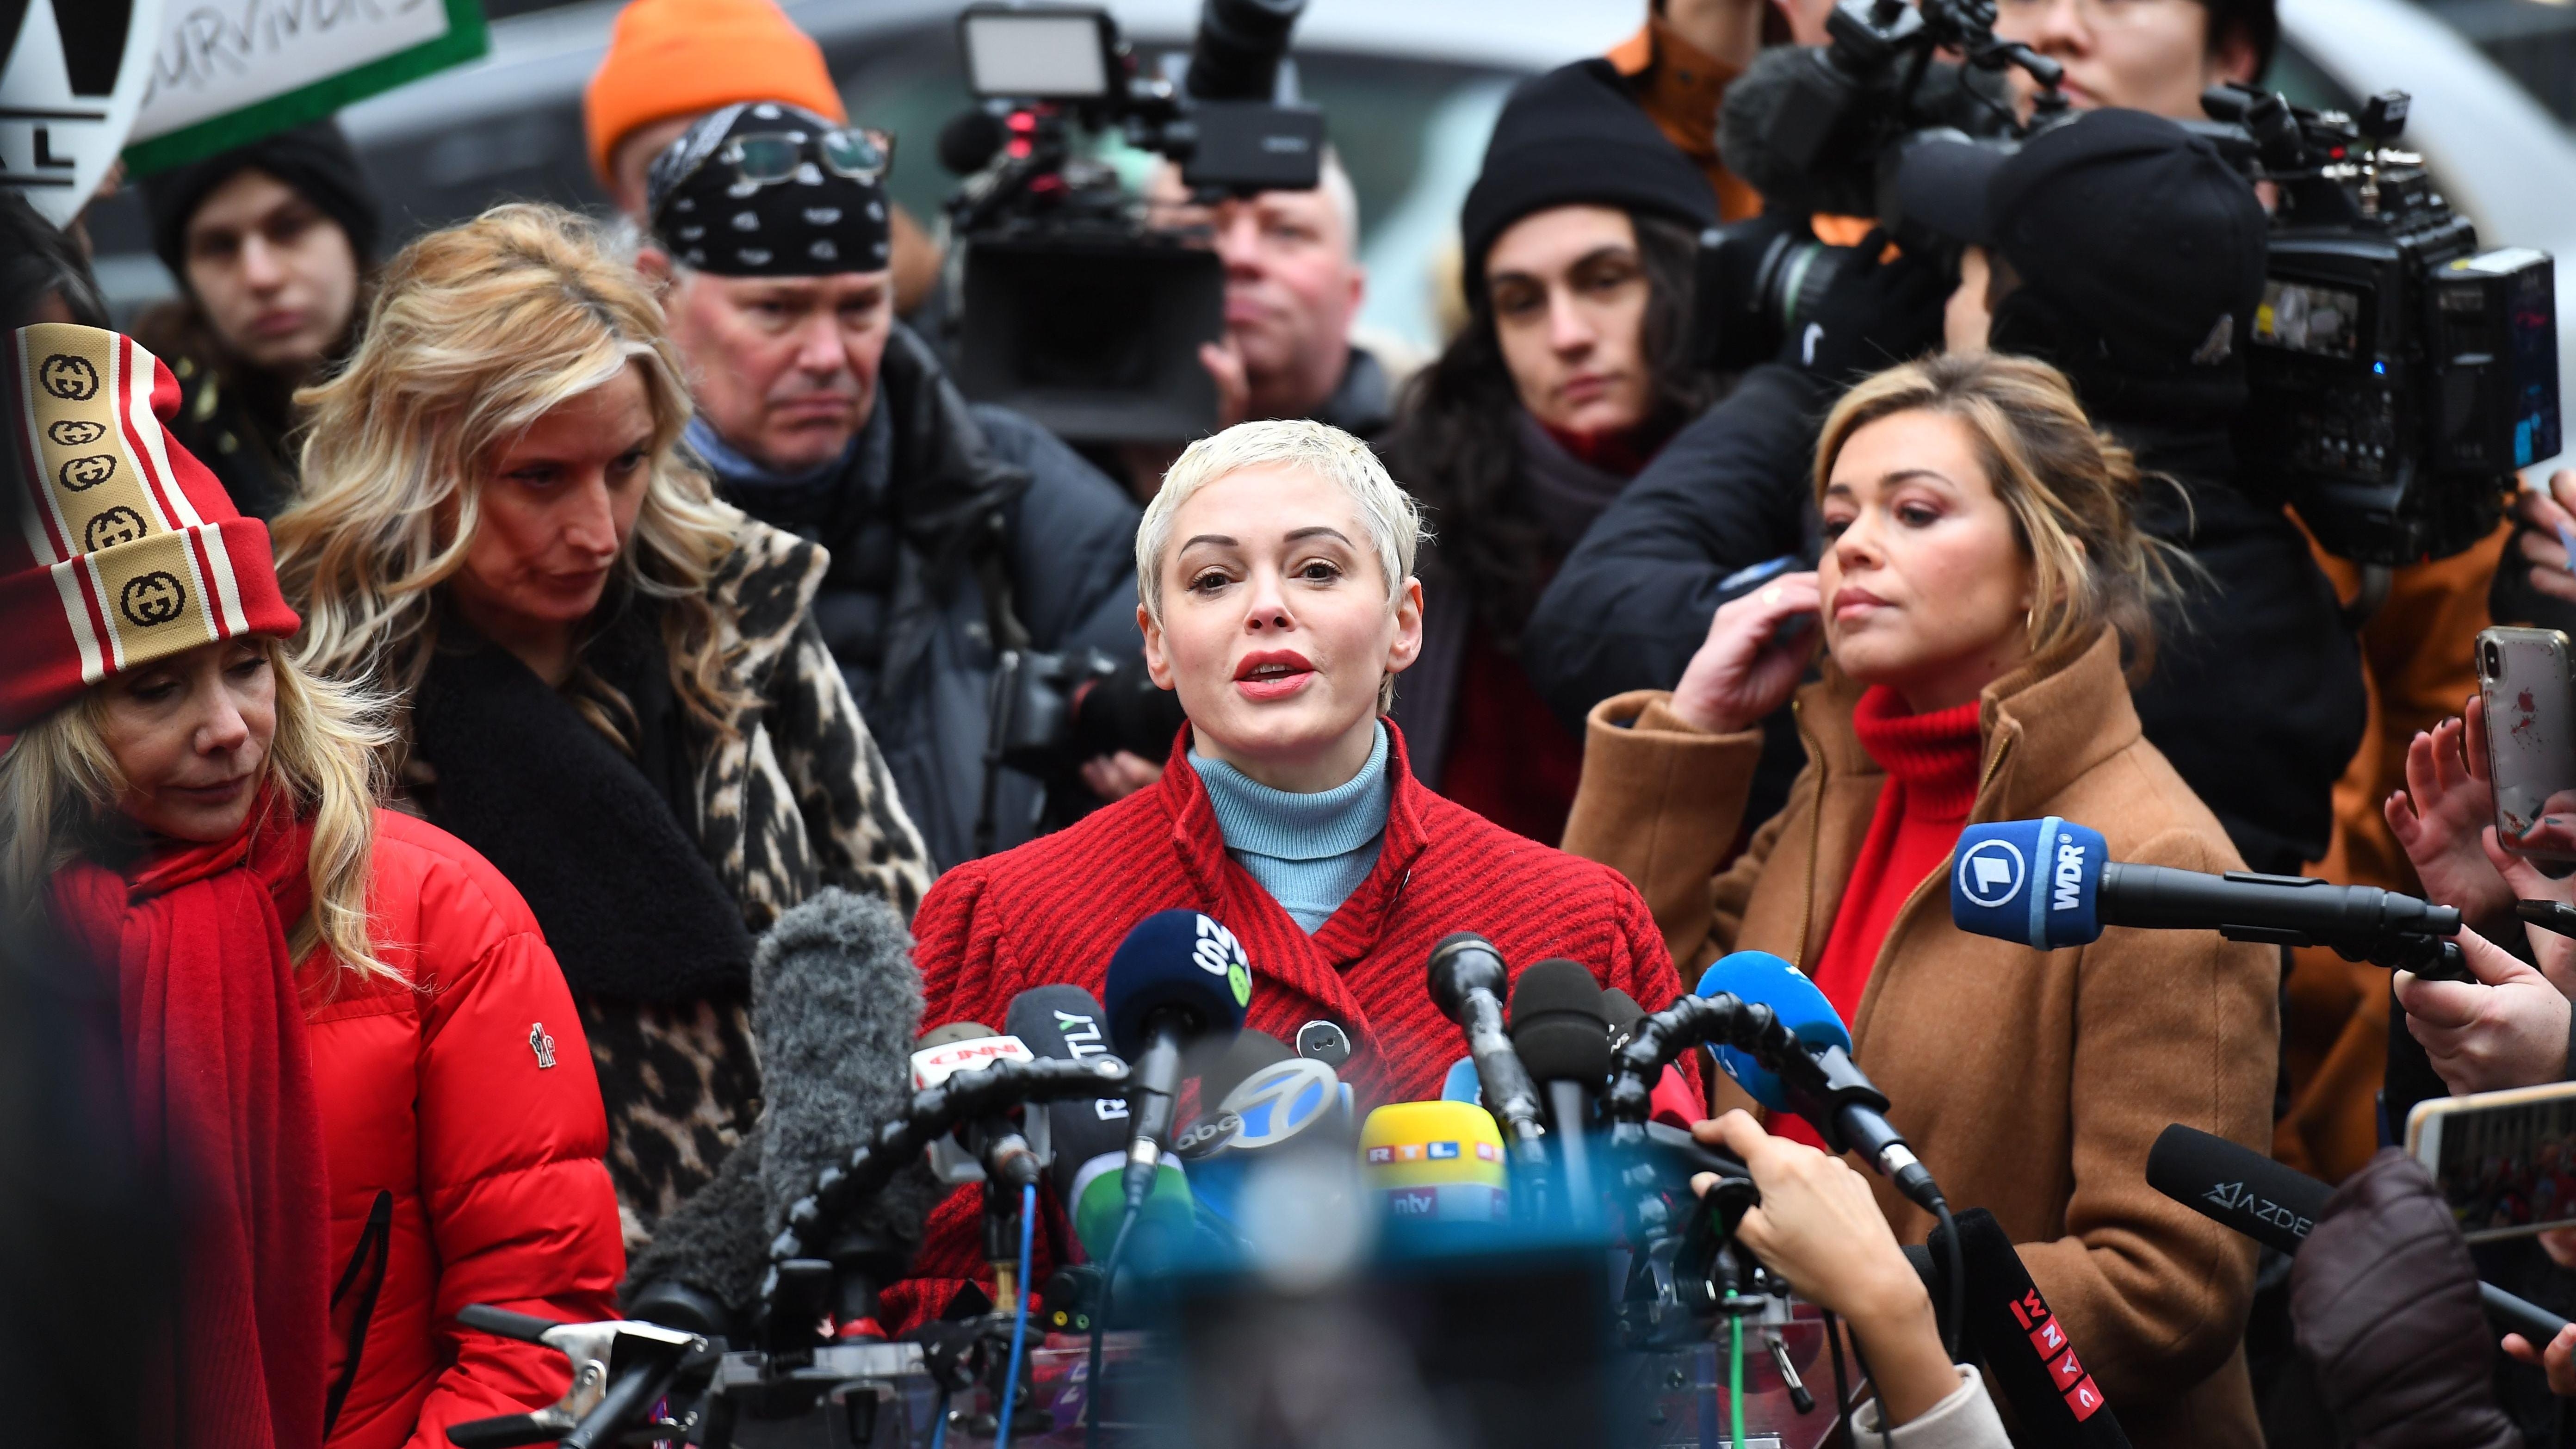 Court dismisses Rose McGowan’s RICO lawsuit against Harvey Weinstein and his lawyers